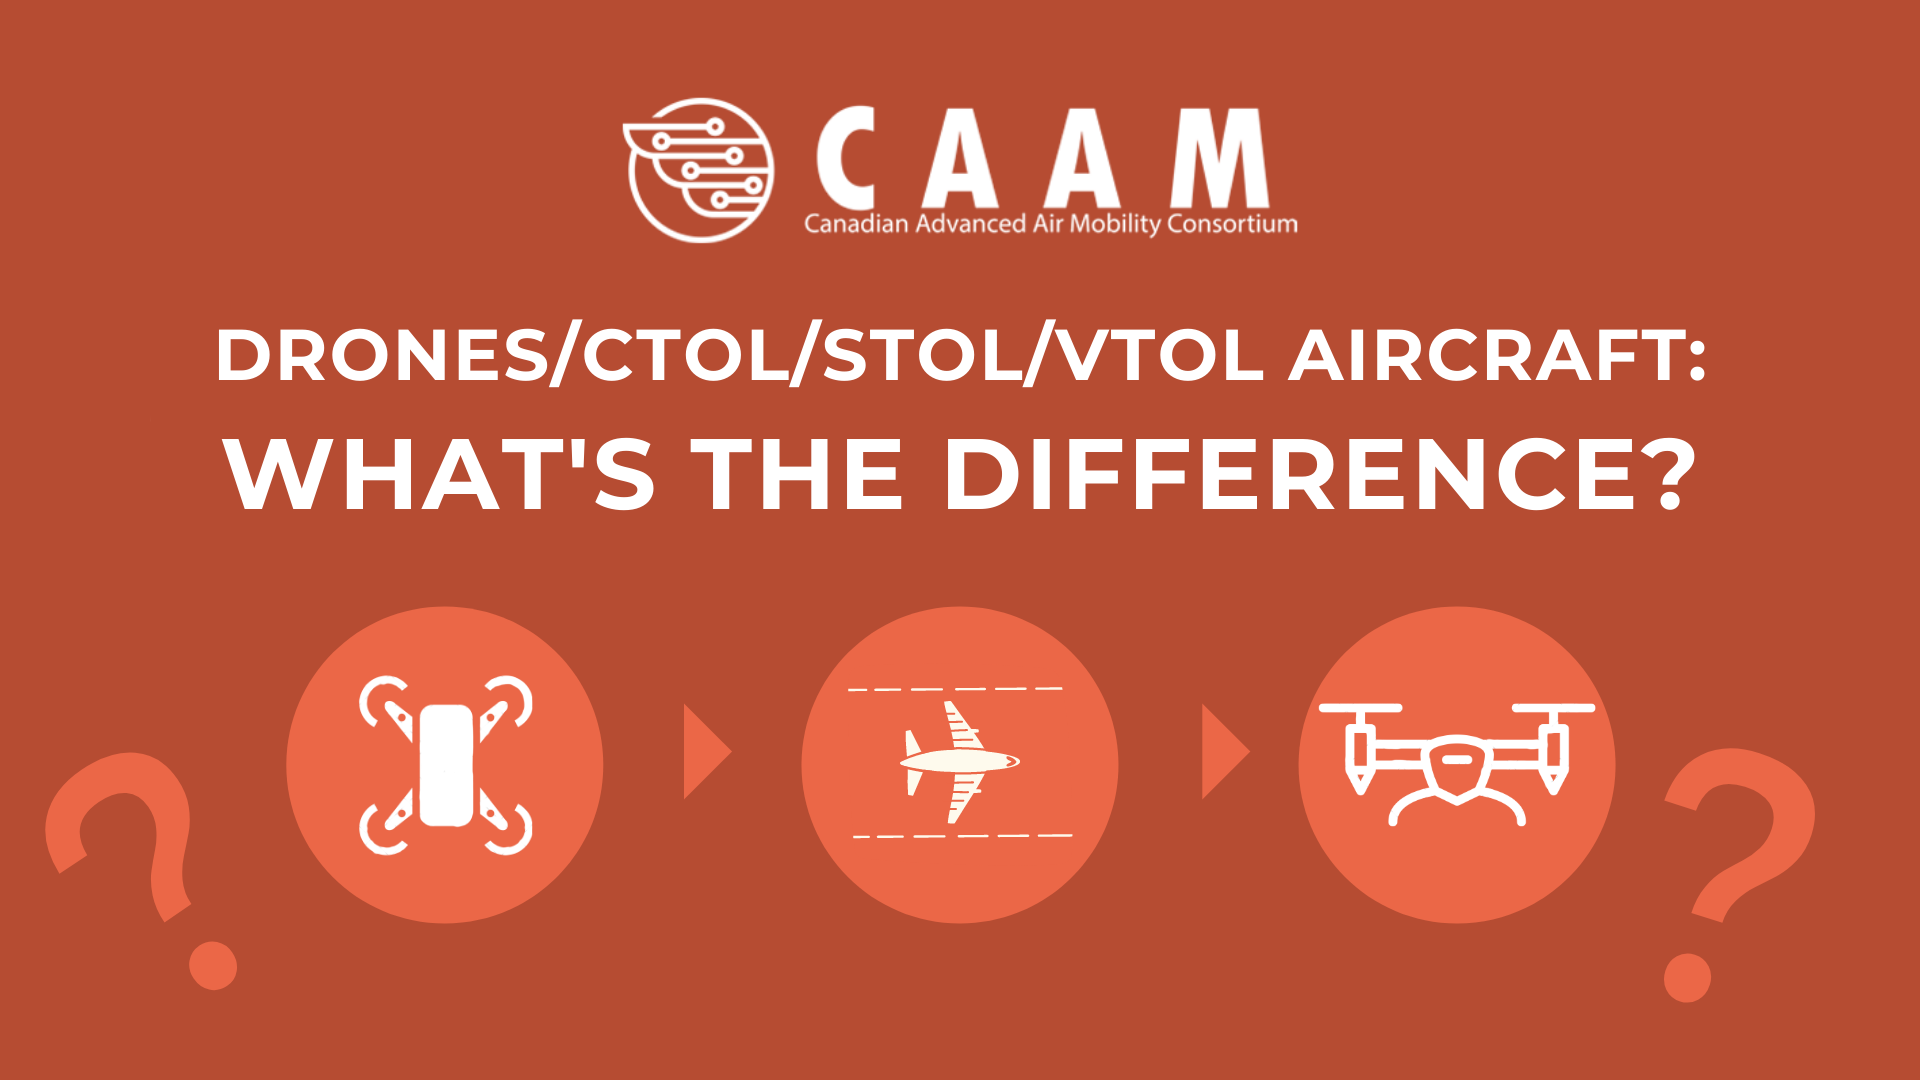 What's the difference in AAM Aircraft?